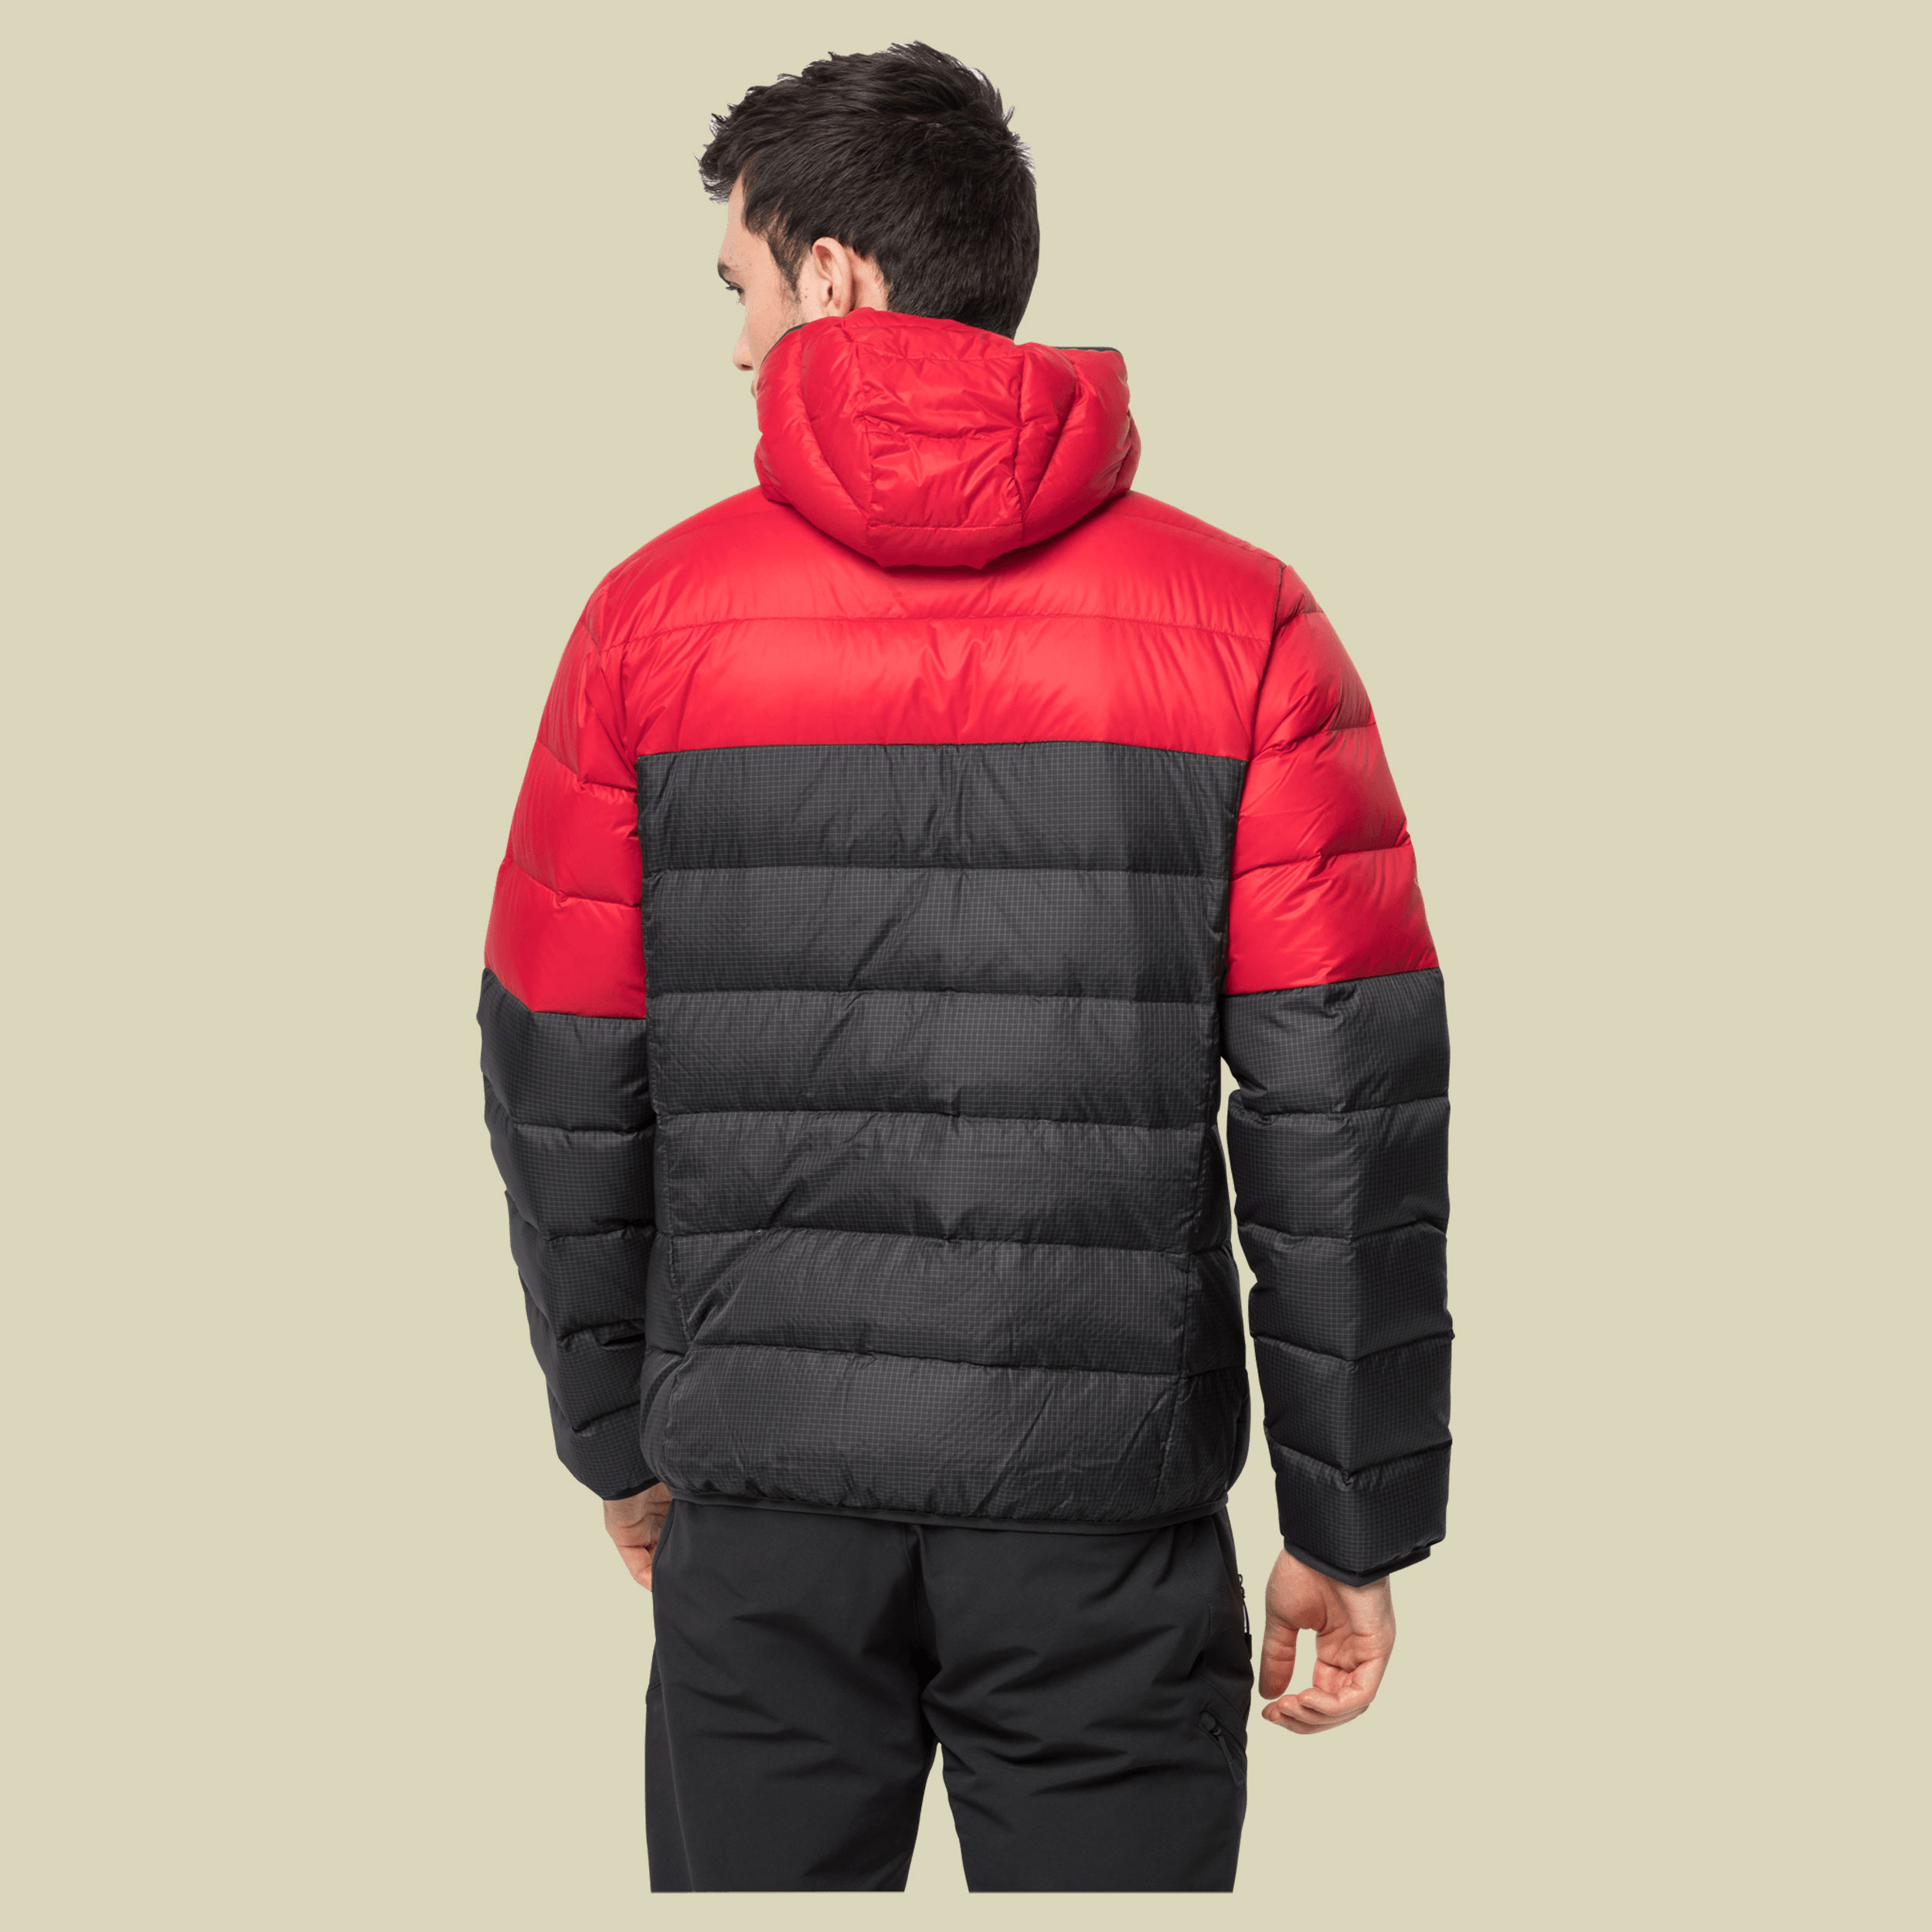 DNA Tundra Hoody Men Größe M  Farbe red lacquer